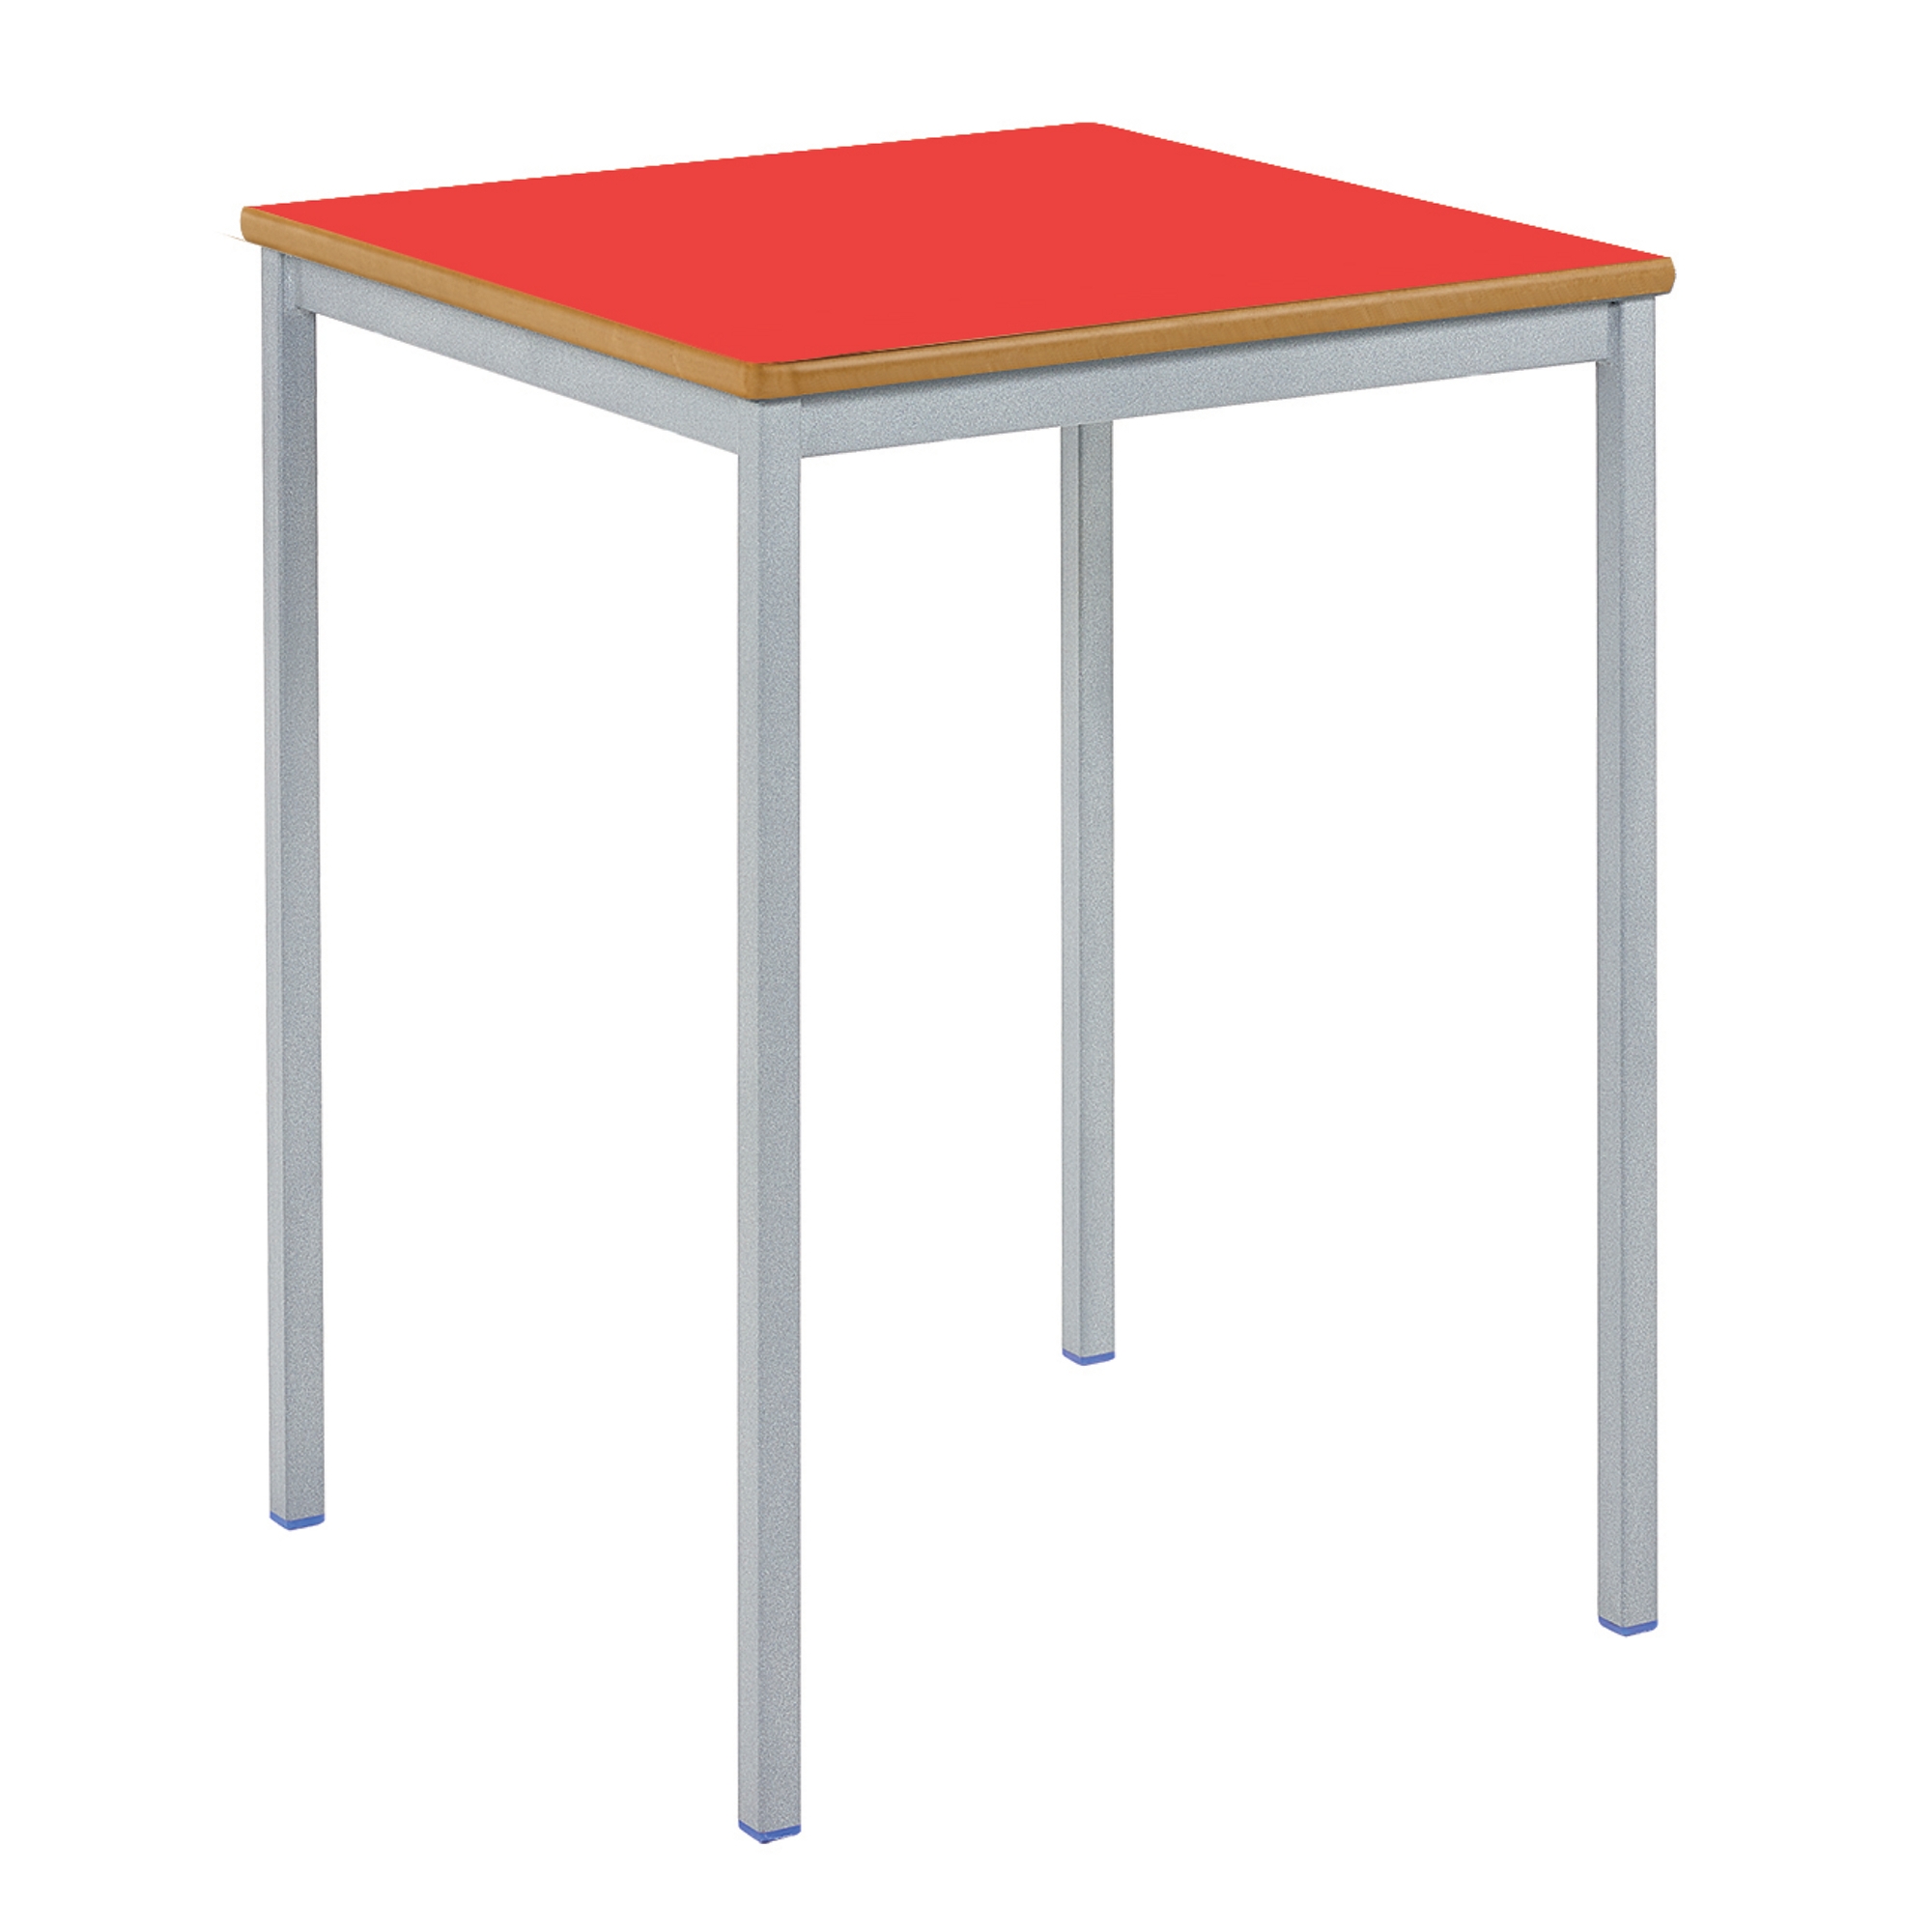 Classmates Square Fully Welded Classroom Table - 600 x 600 x 460mm - Red